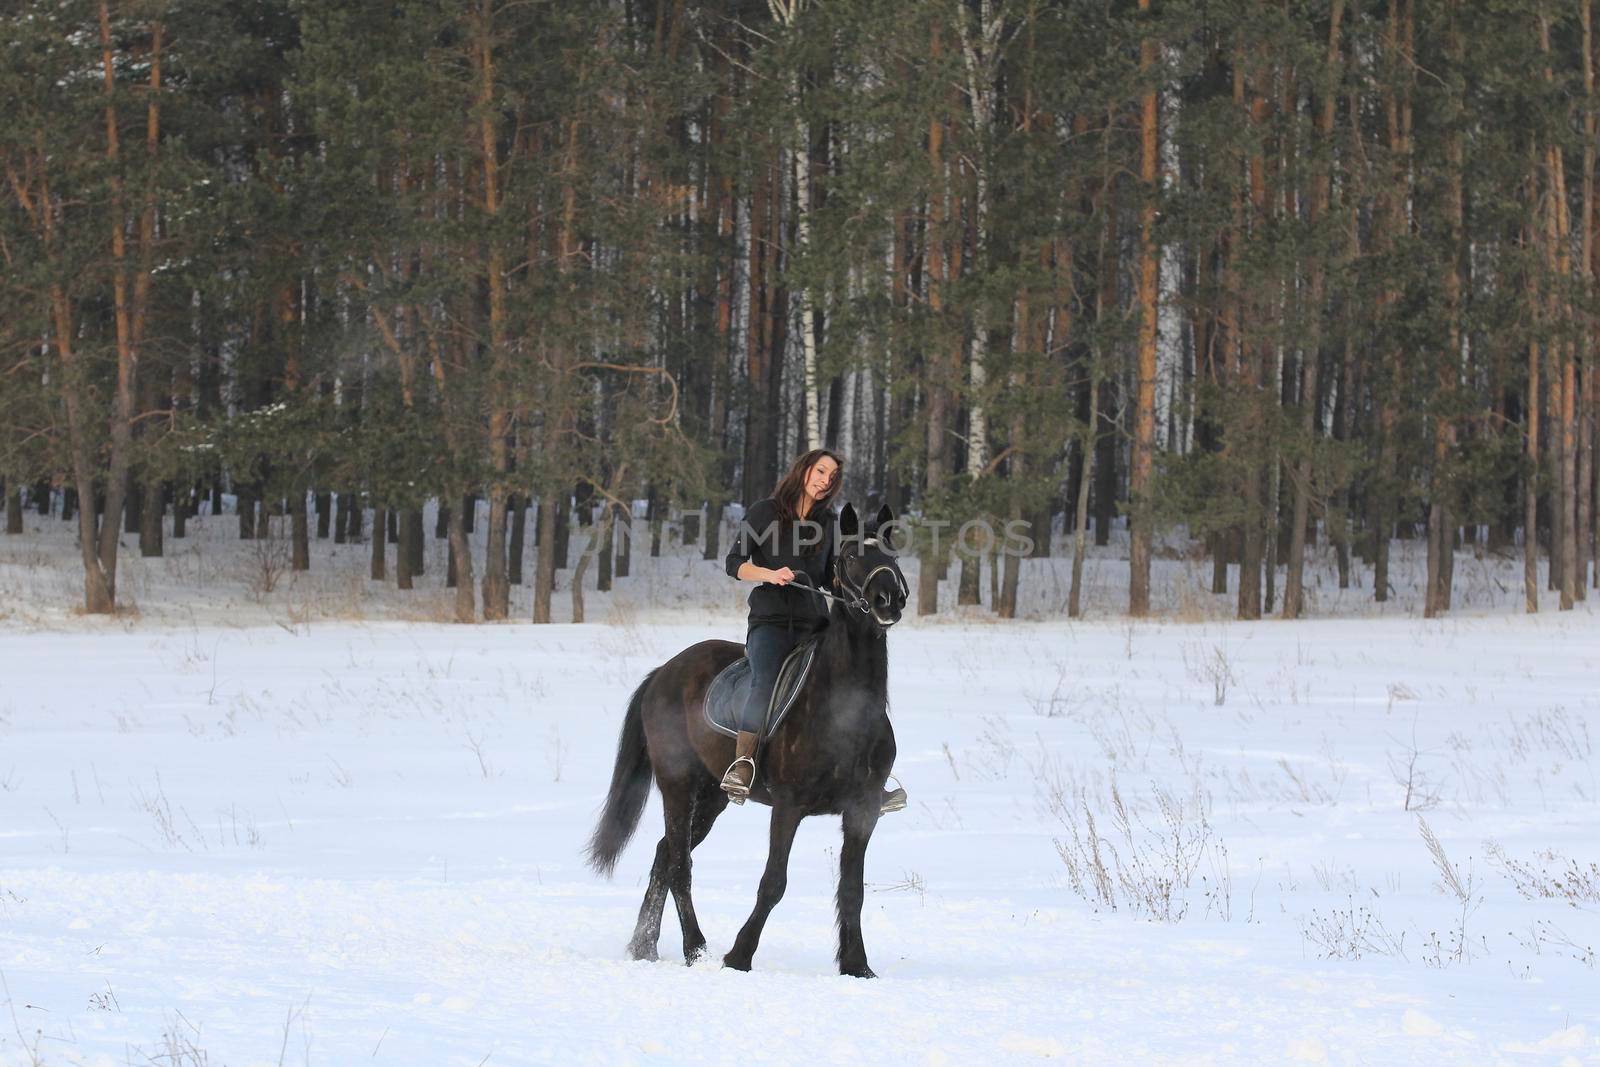 Woman on black horse in snowy forest, telephoto shot